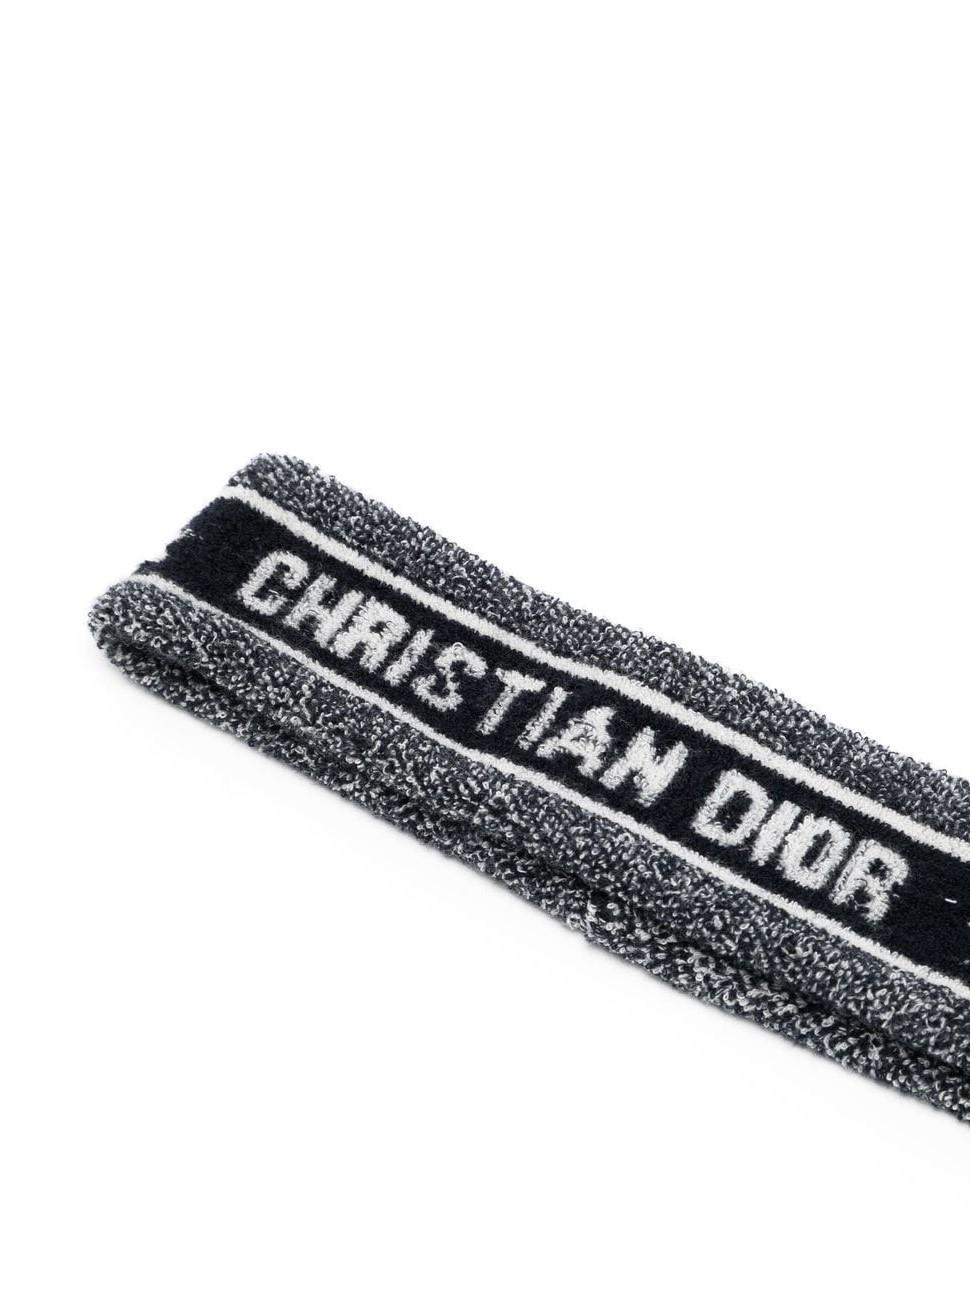 Christian Dior Logo Sweatband  In Excellent Condition In London, GB